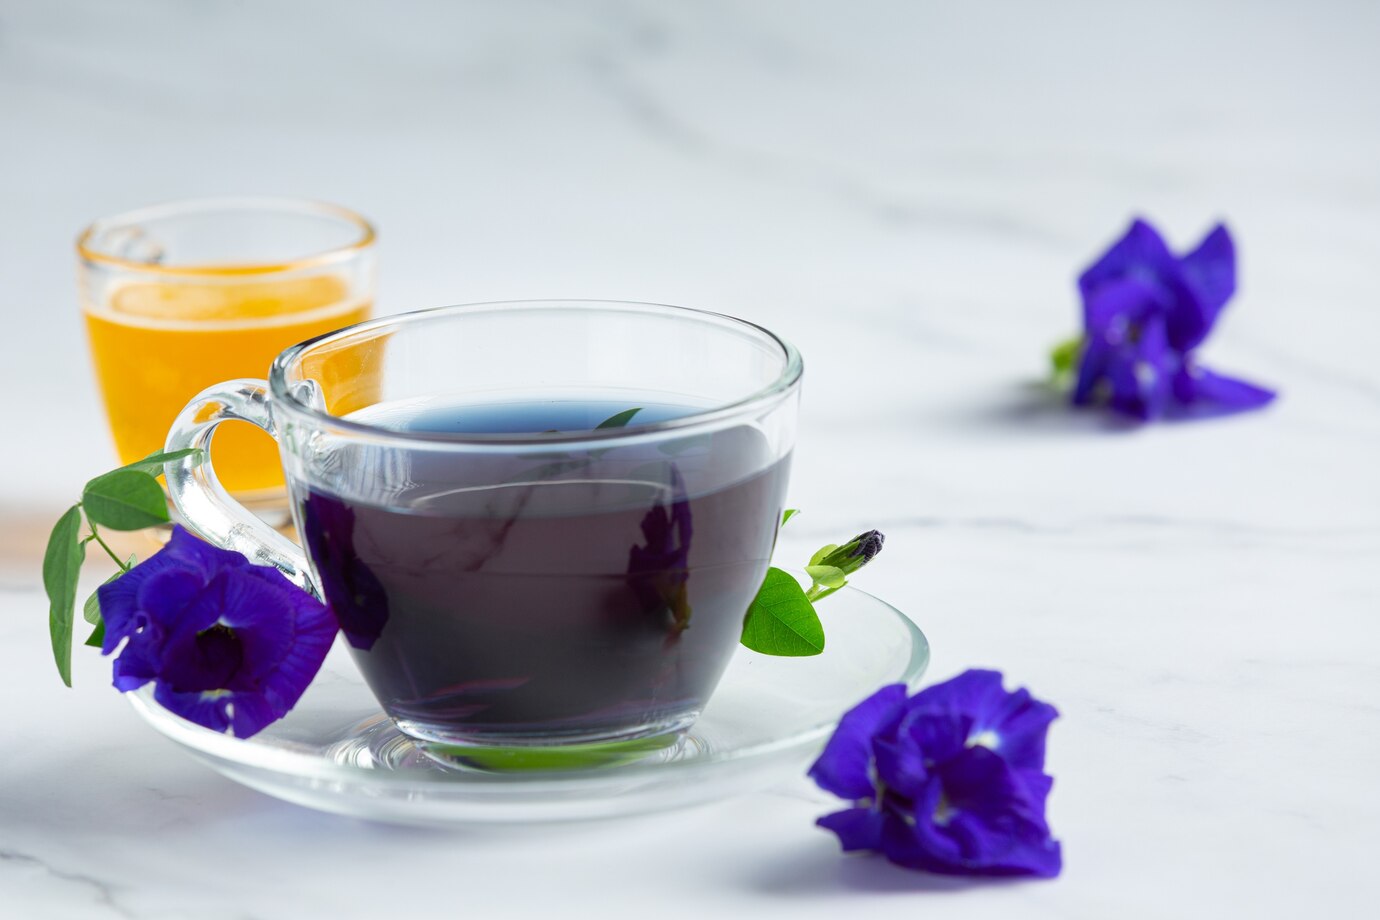 blue tea in a glass cup and gentian blue butterfly pea flowers scattered on the table